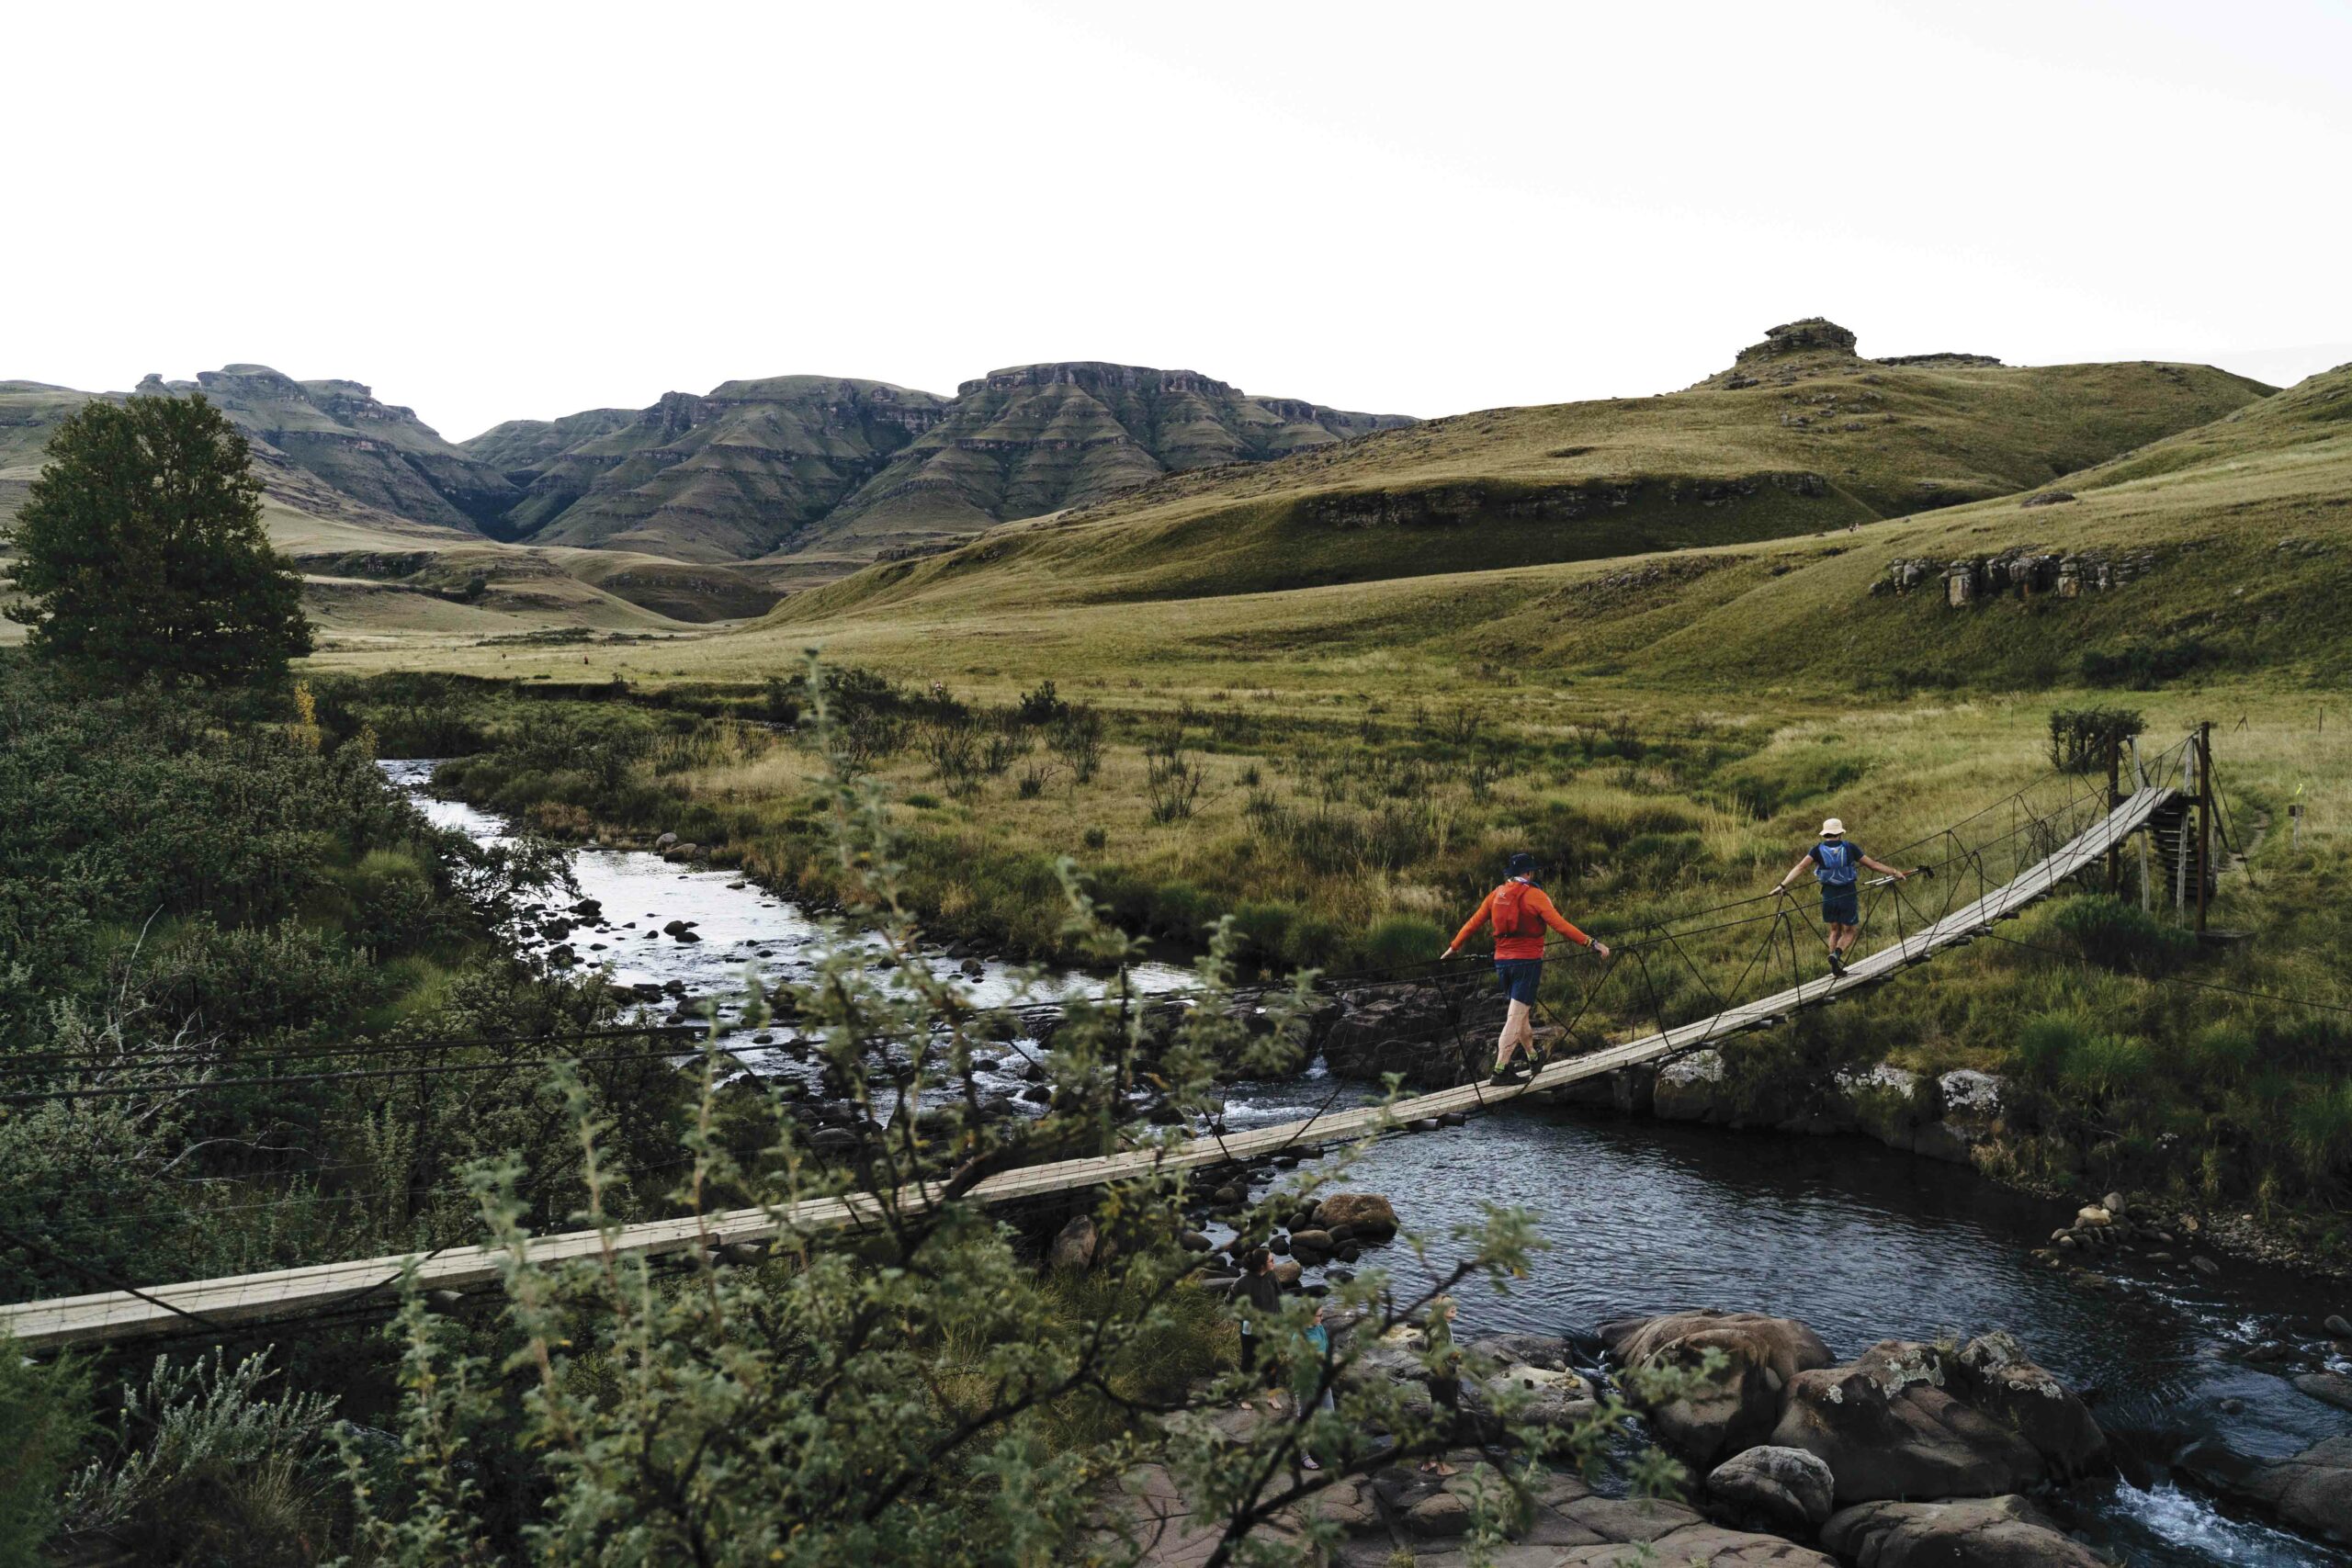 Looking For A New Place To Run? Try This Stunning KZN Trail Runner's